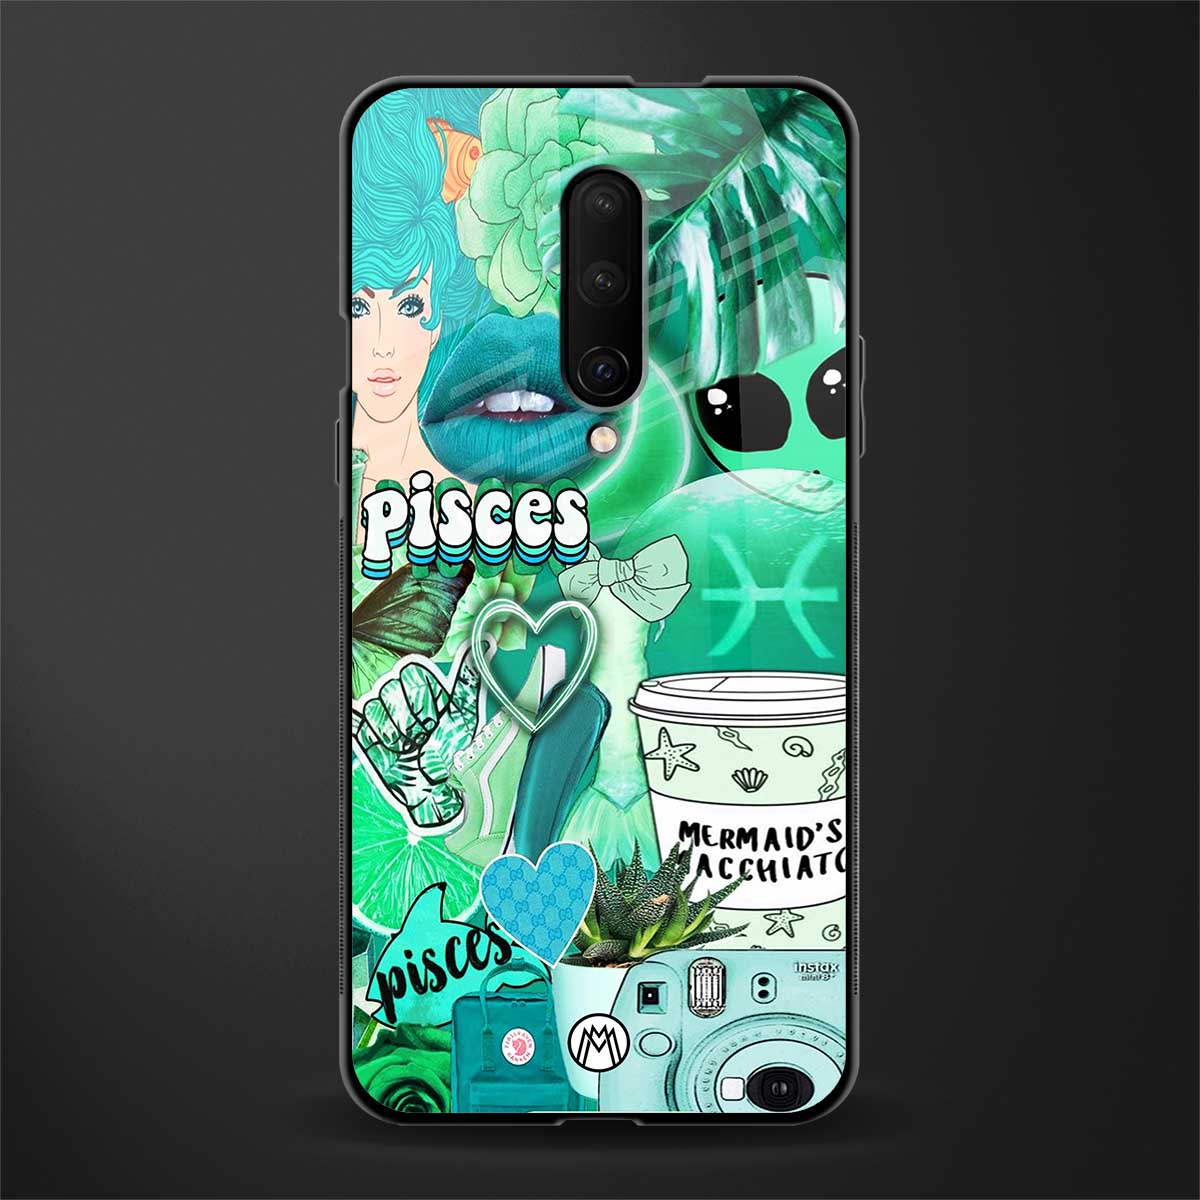 pisces aesthetic collage glass case for oneplus 7 pro image